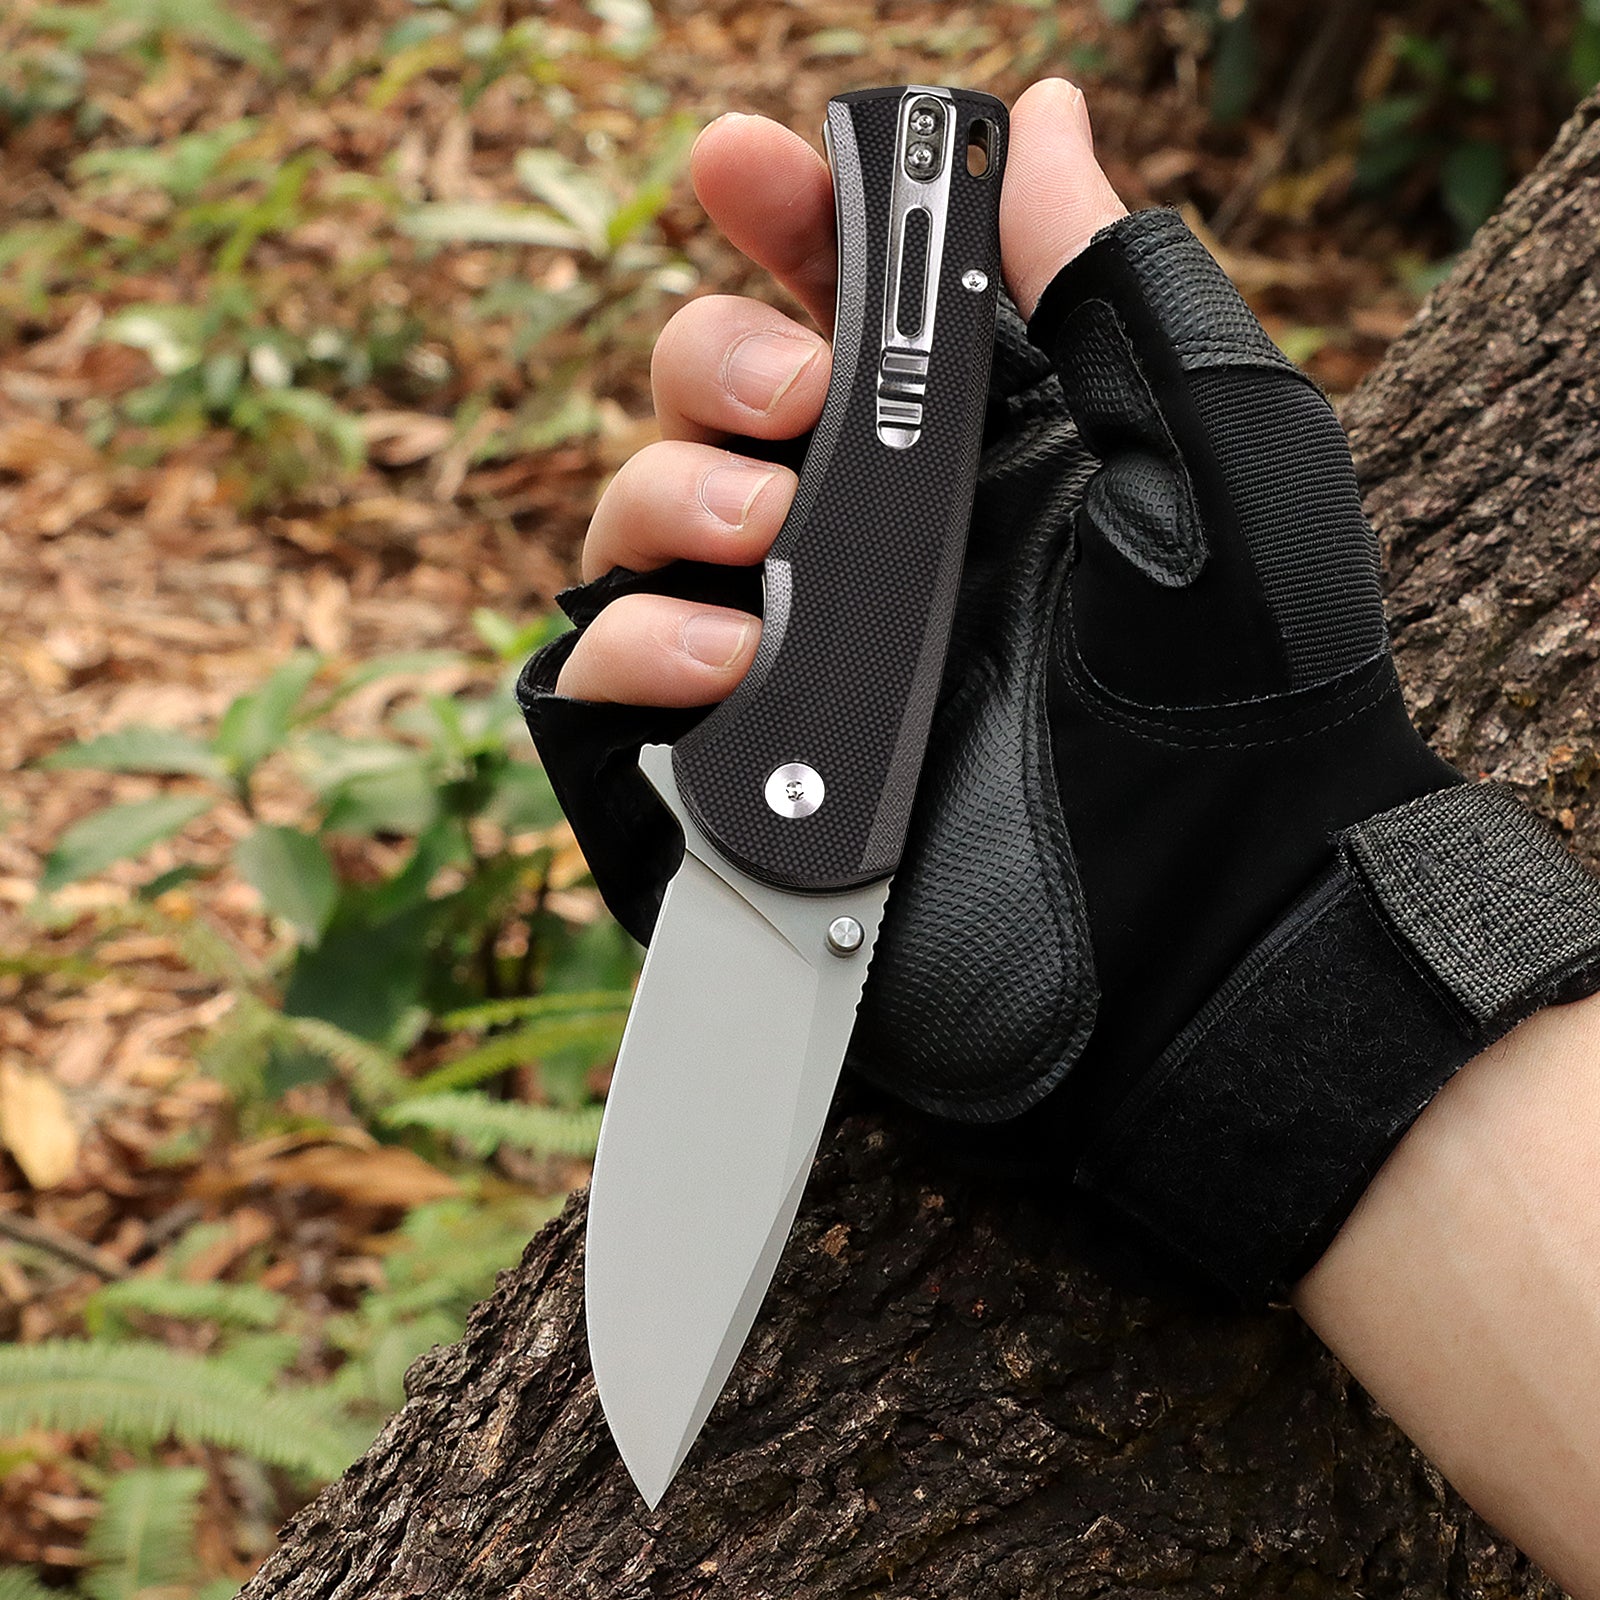  SHAN ZU Pocket Knife 3.2 in, 14C28N Steel Blade EDC Folding  Knife for Men & Women, Utility Survival Knife with G10 Handle & Pocket Clip  for Camping Fishing Hiking Hunting 